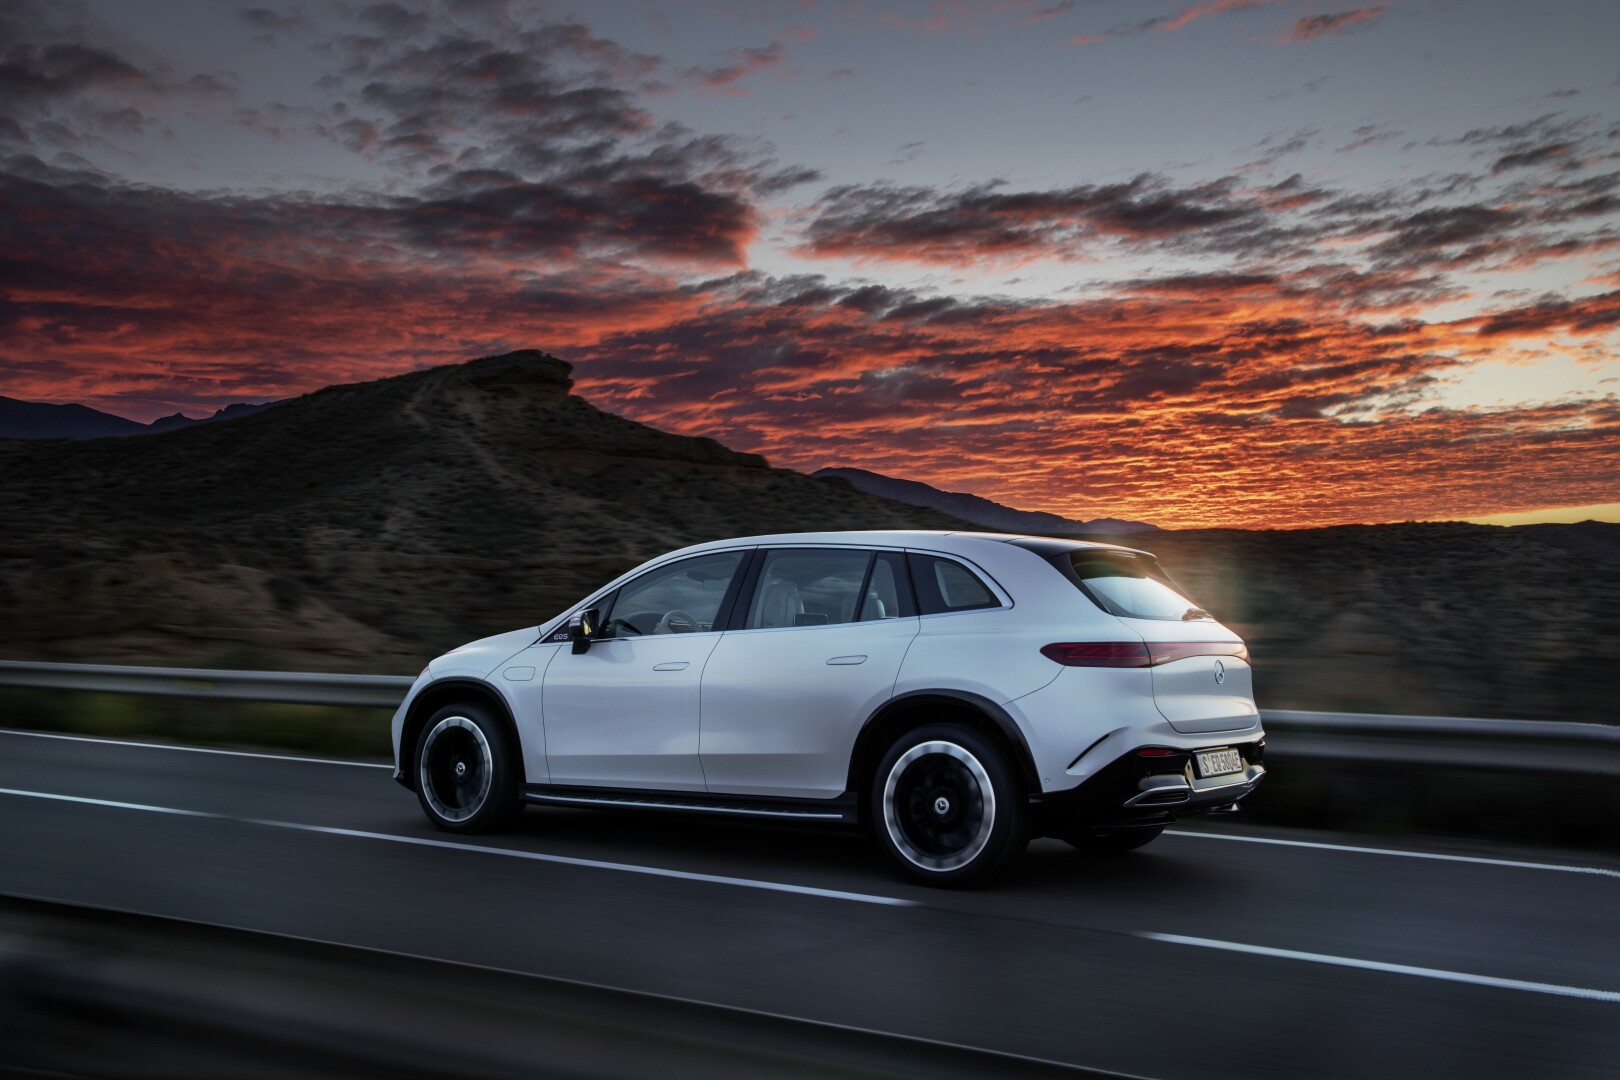 Mercedes-Benz EQS 450 sunset view on the road